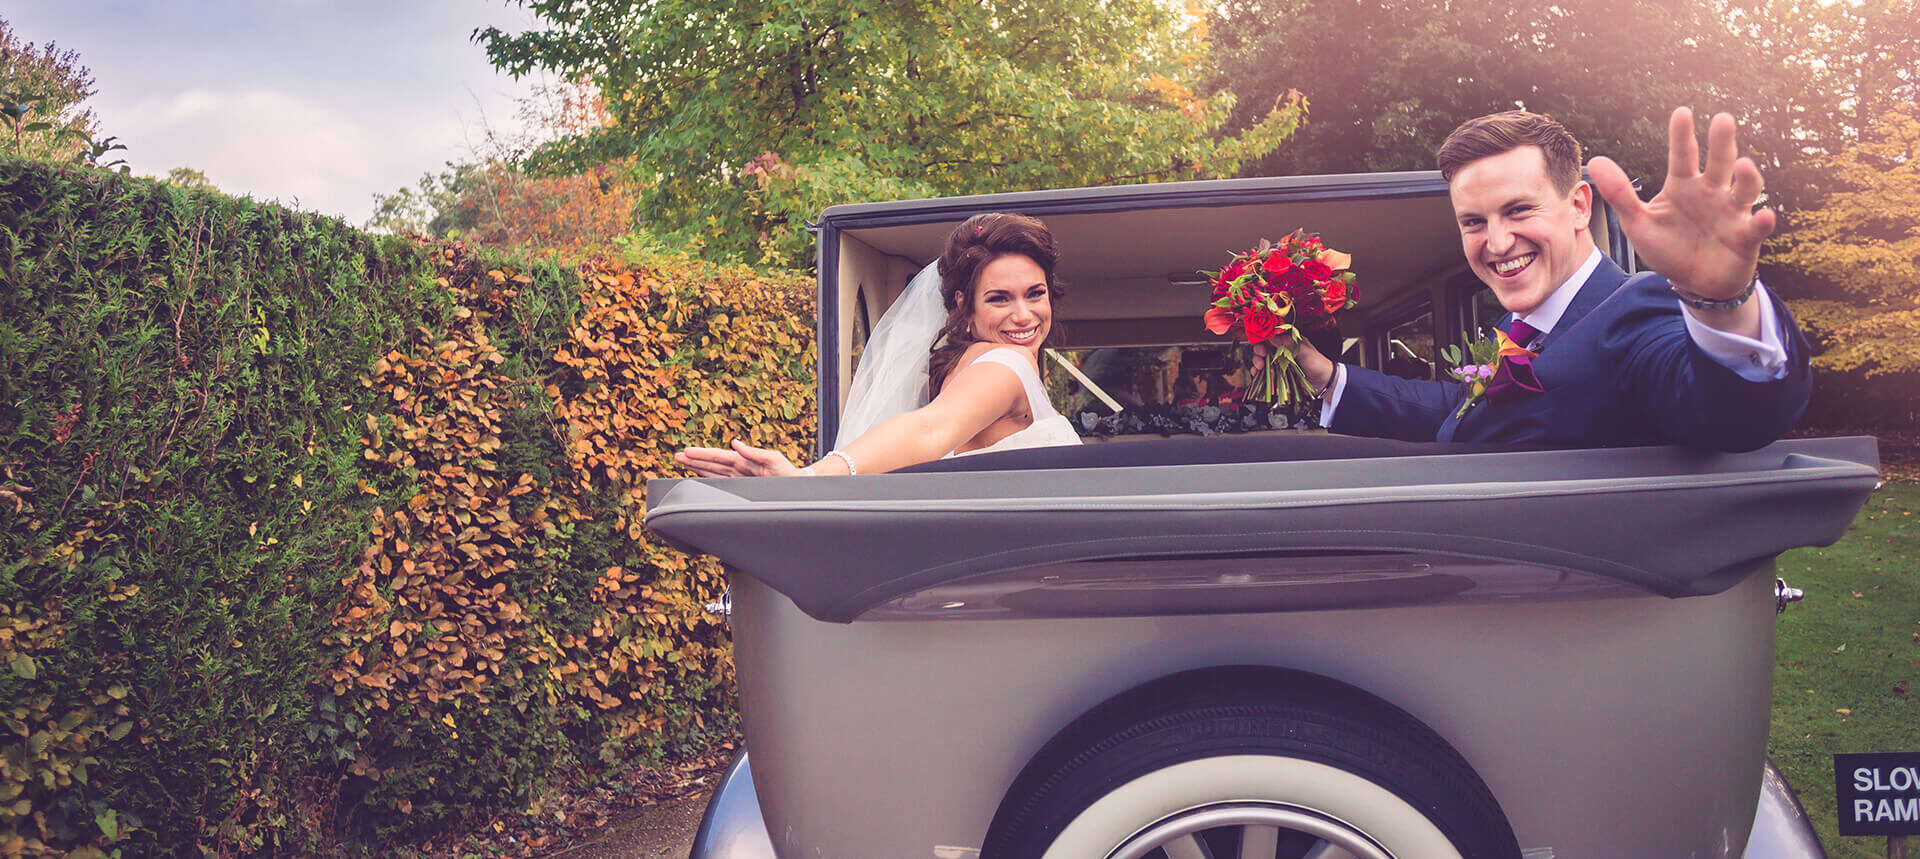 The newlyweds drive away in their vintage wedding car during the evening reception